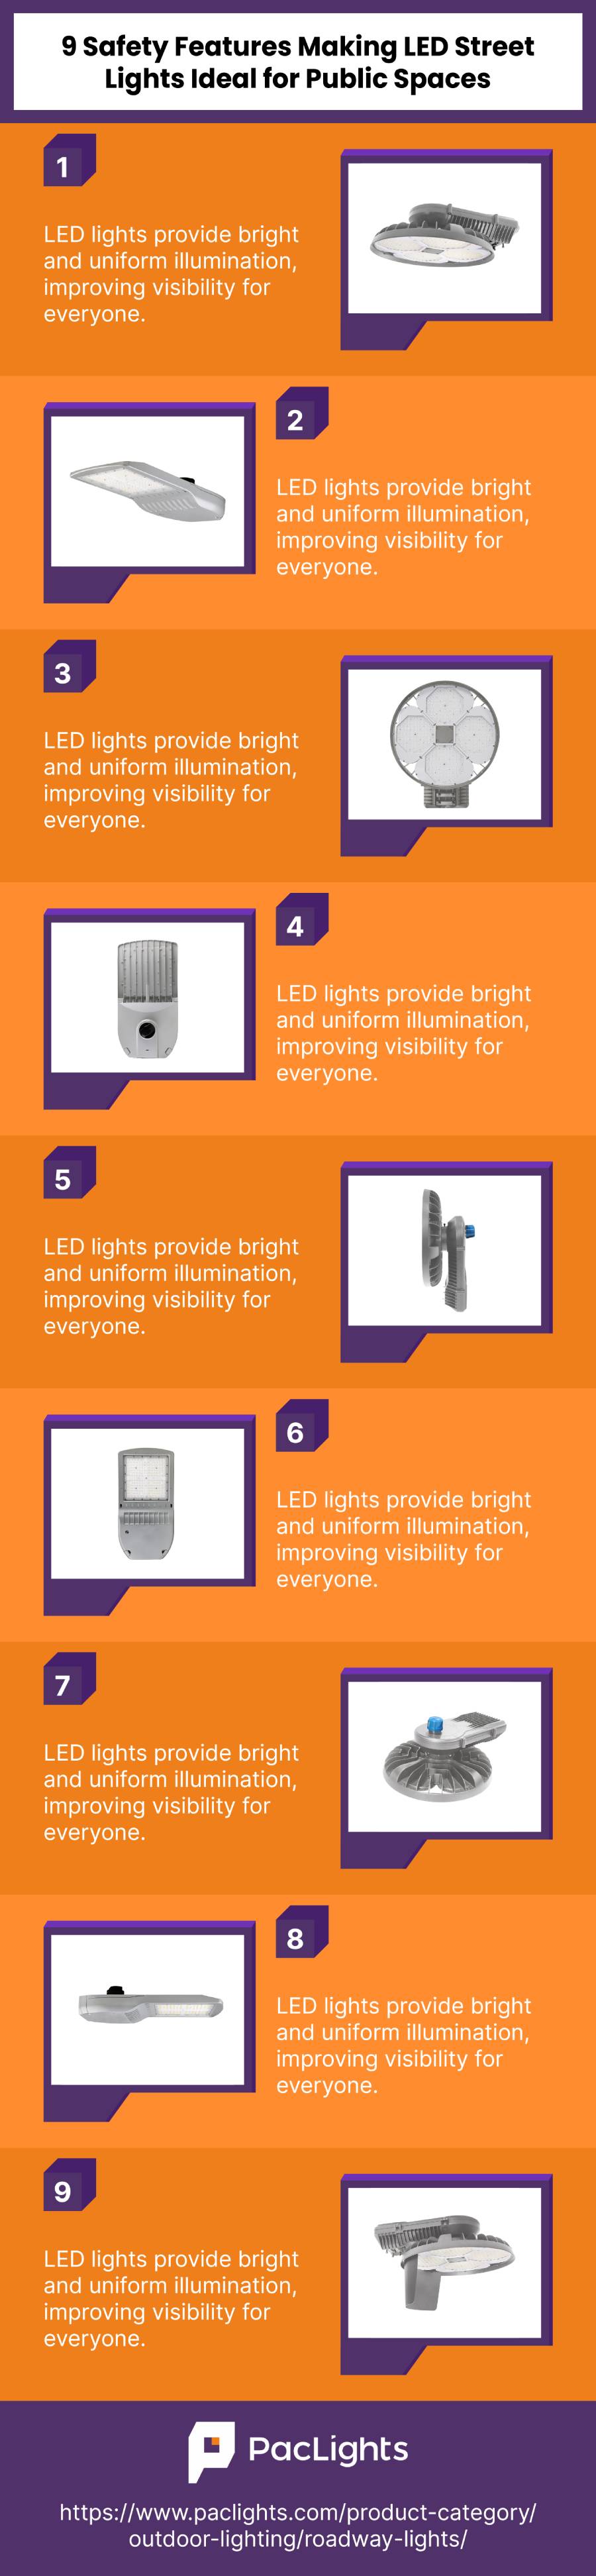 9 Safety Features Making LED Street Lights Ideal for Public Spaces